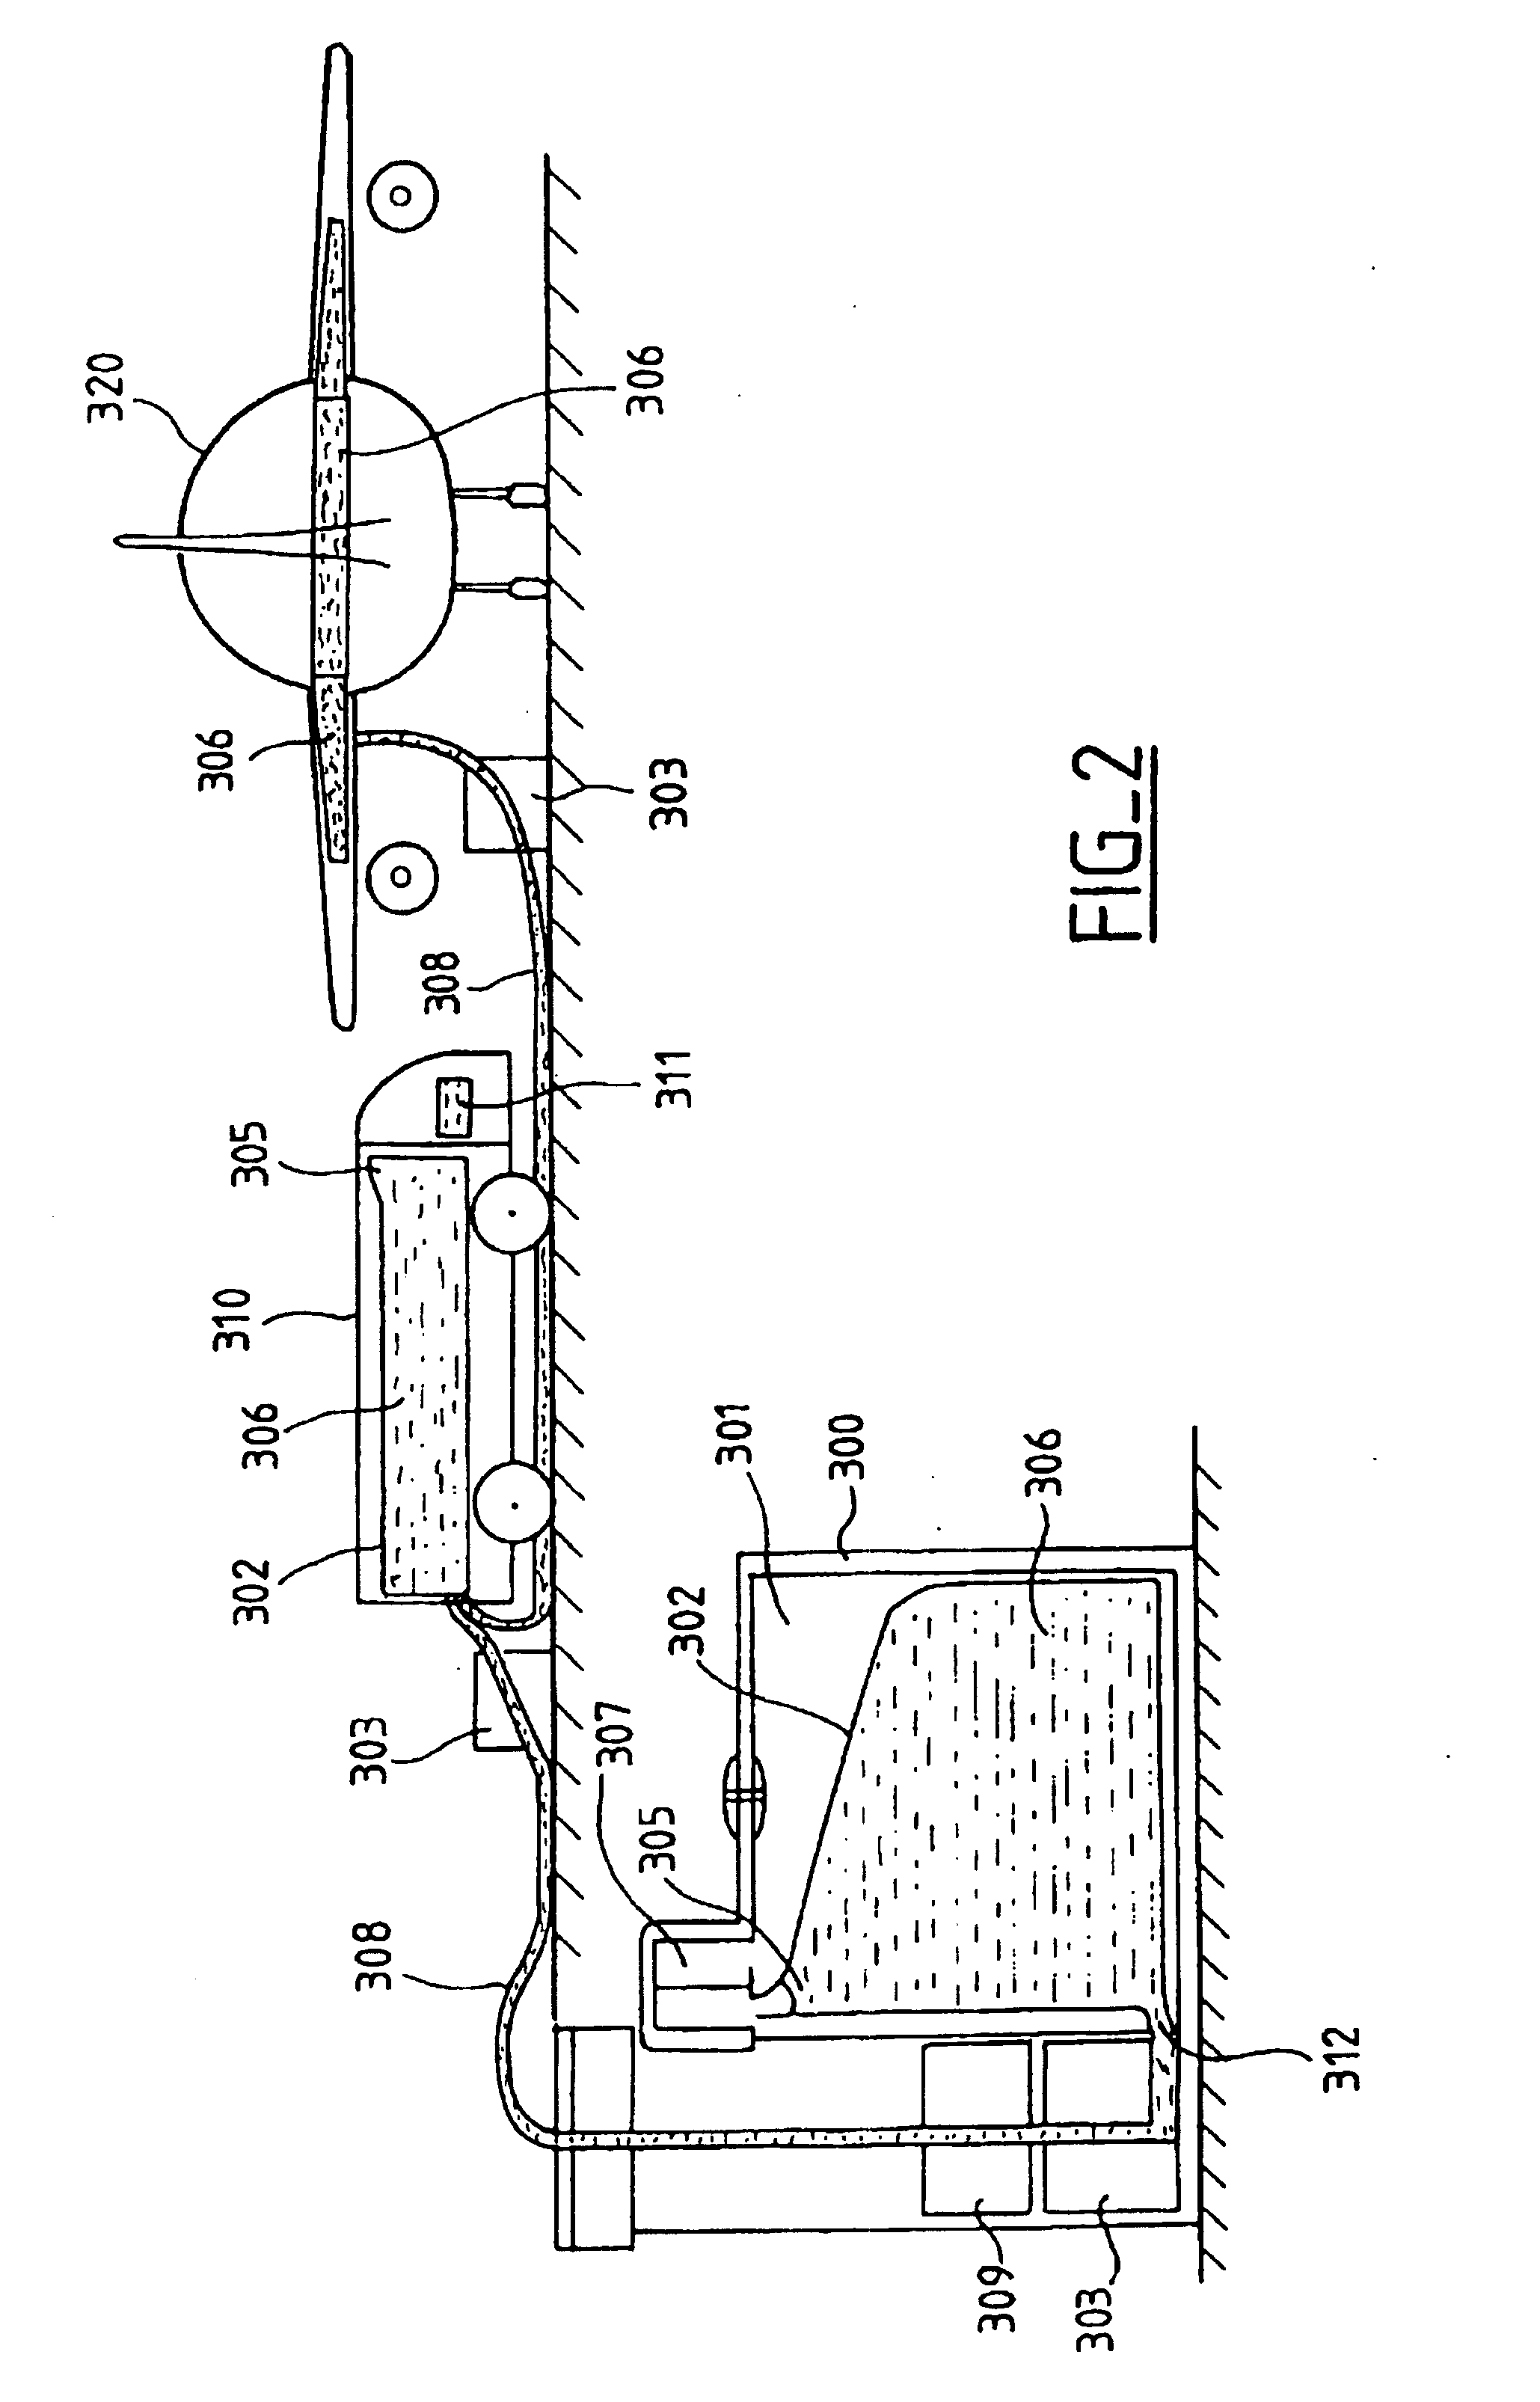 Device to ensure safety of storage, transfer, transport and handling of dangerous, combustible, oxidizing, corrosive, toxic and/or polluting products